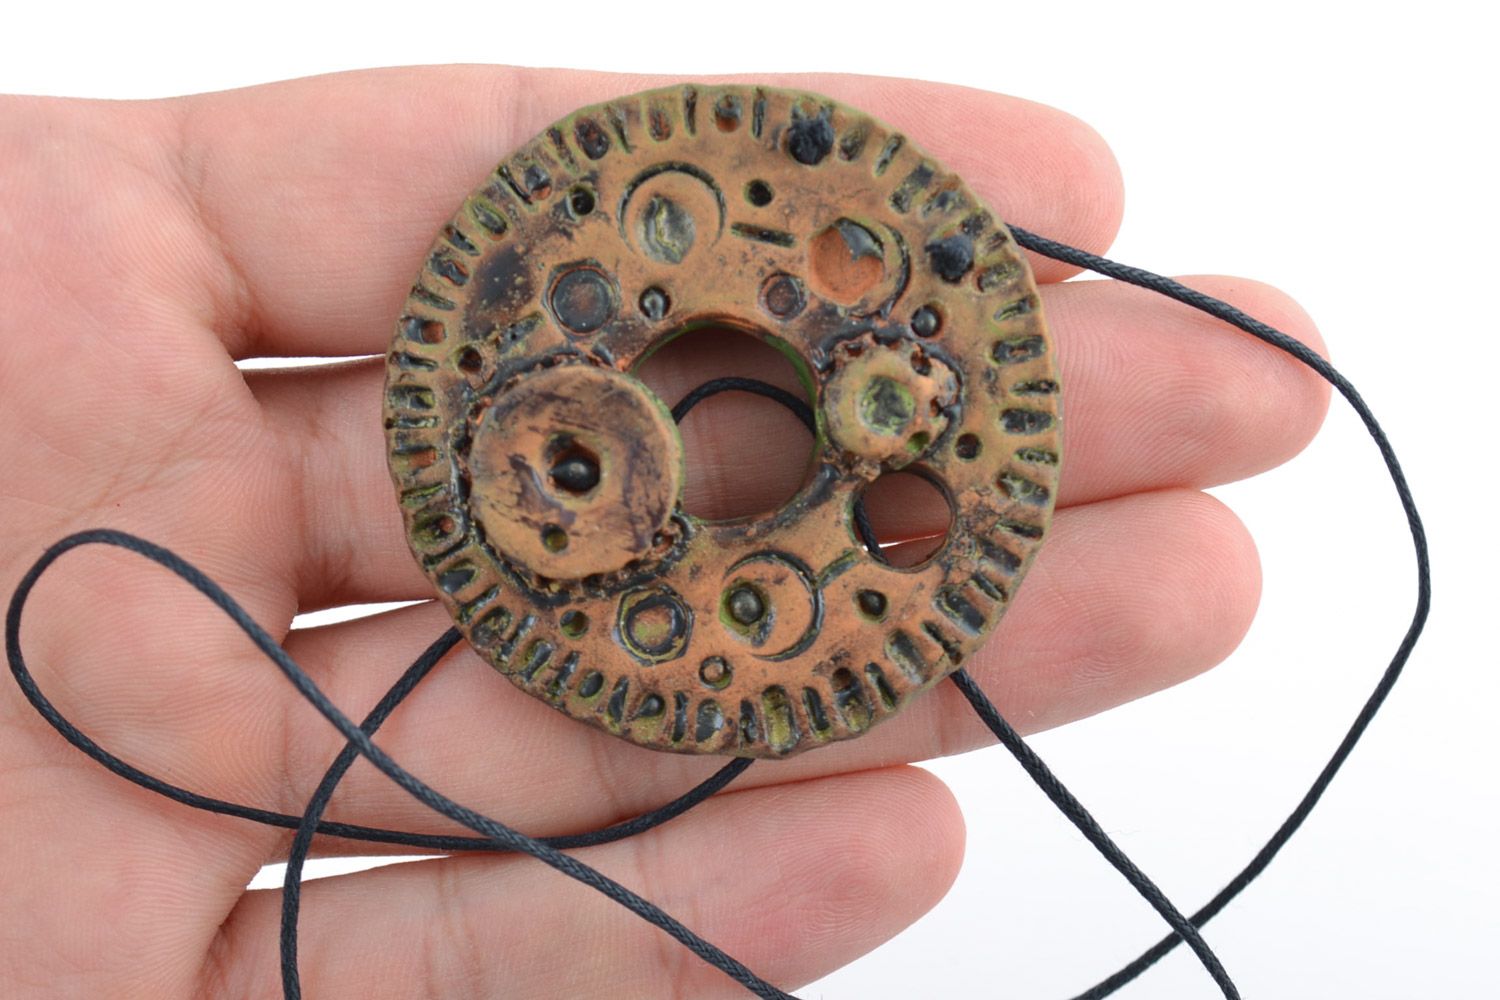 Handmade painted ceramic pendant in the shape of round clock mechanism on cord photo 3